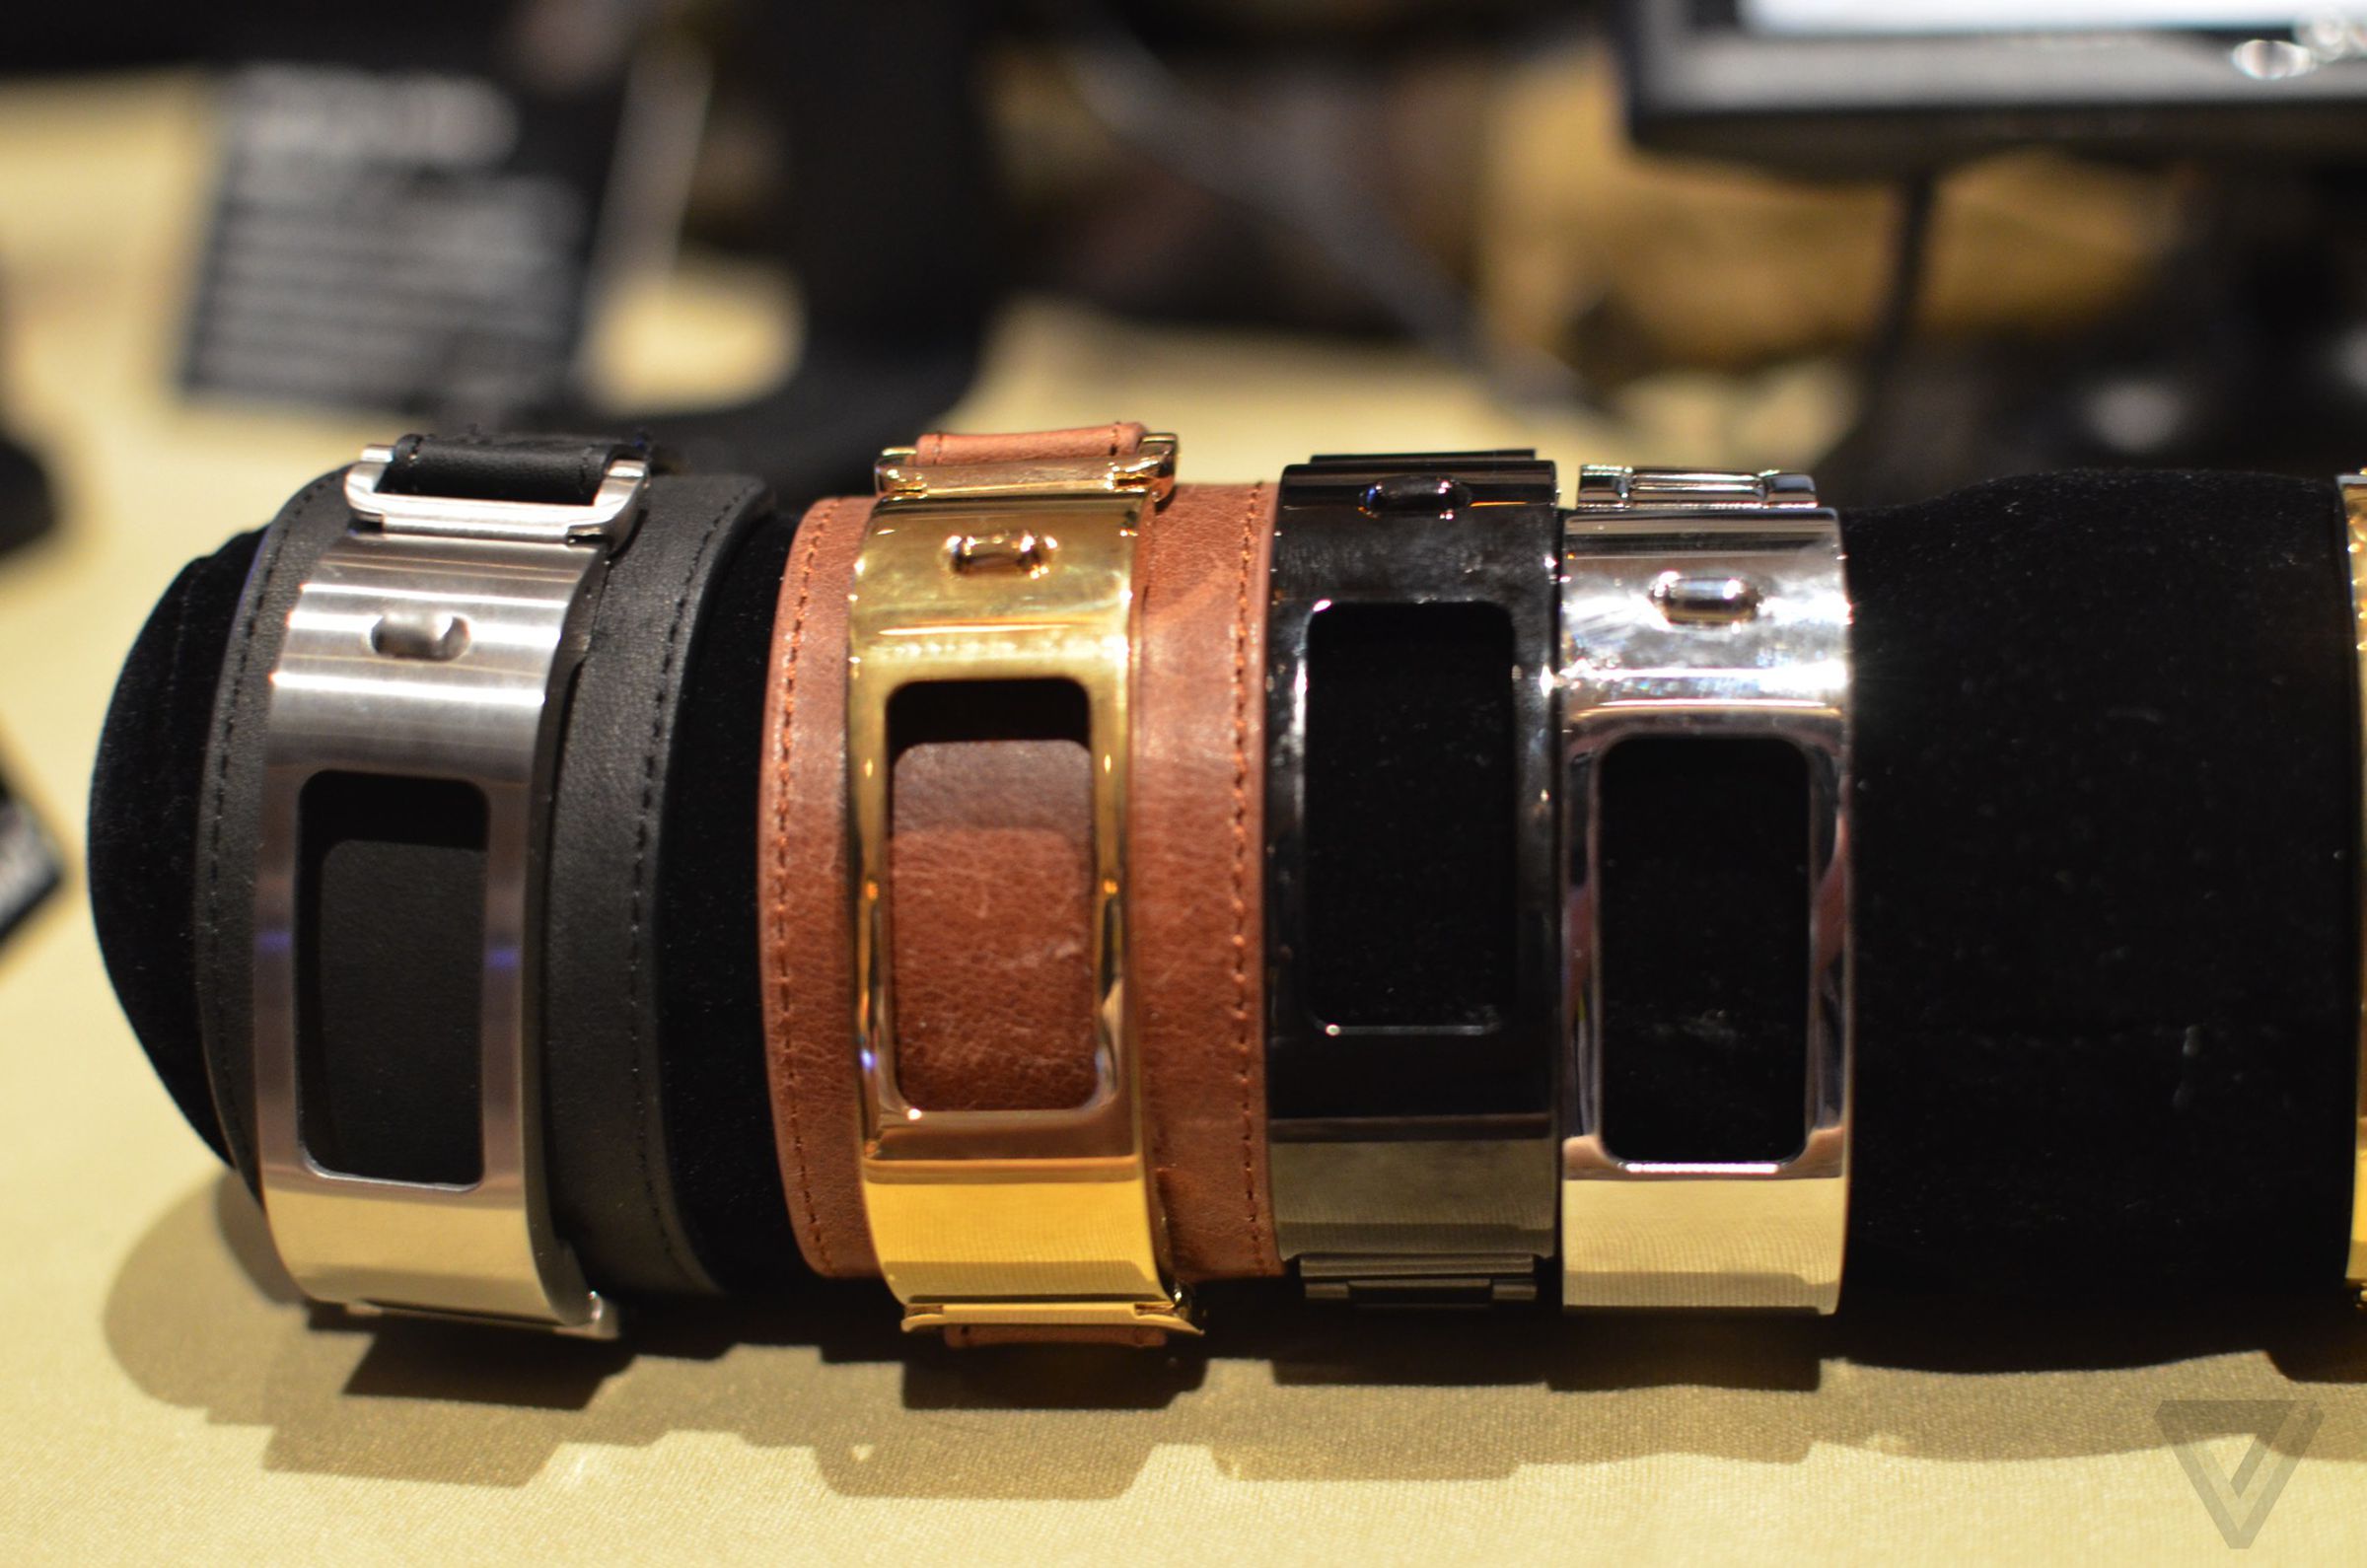 Garmin Vivofit Style Collection and Signature Collection hands-on images